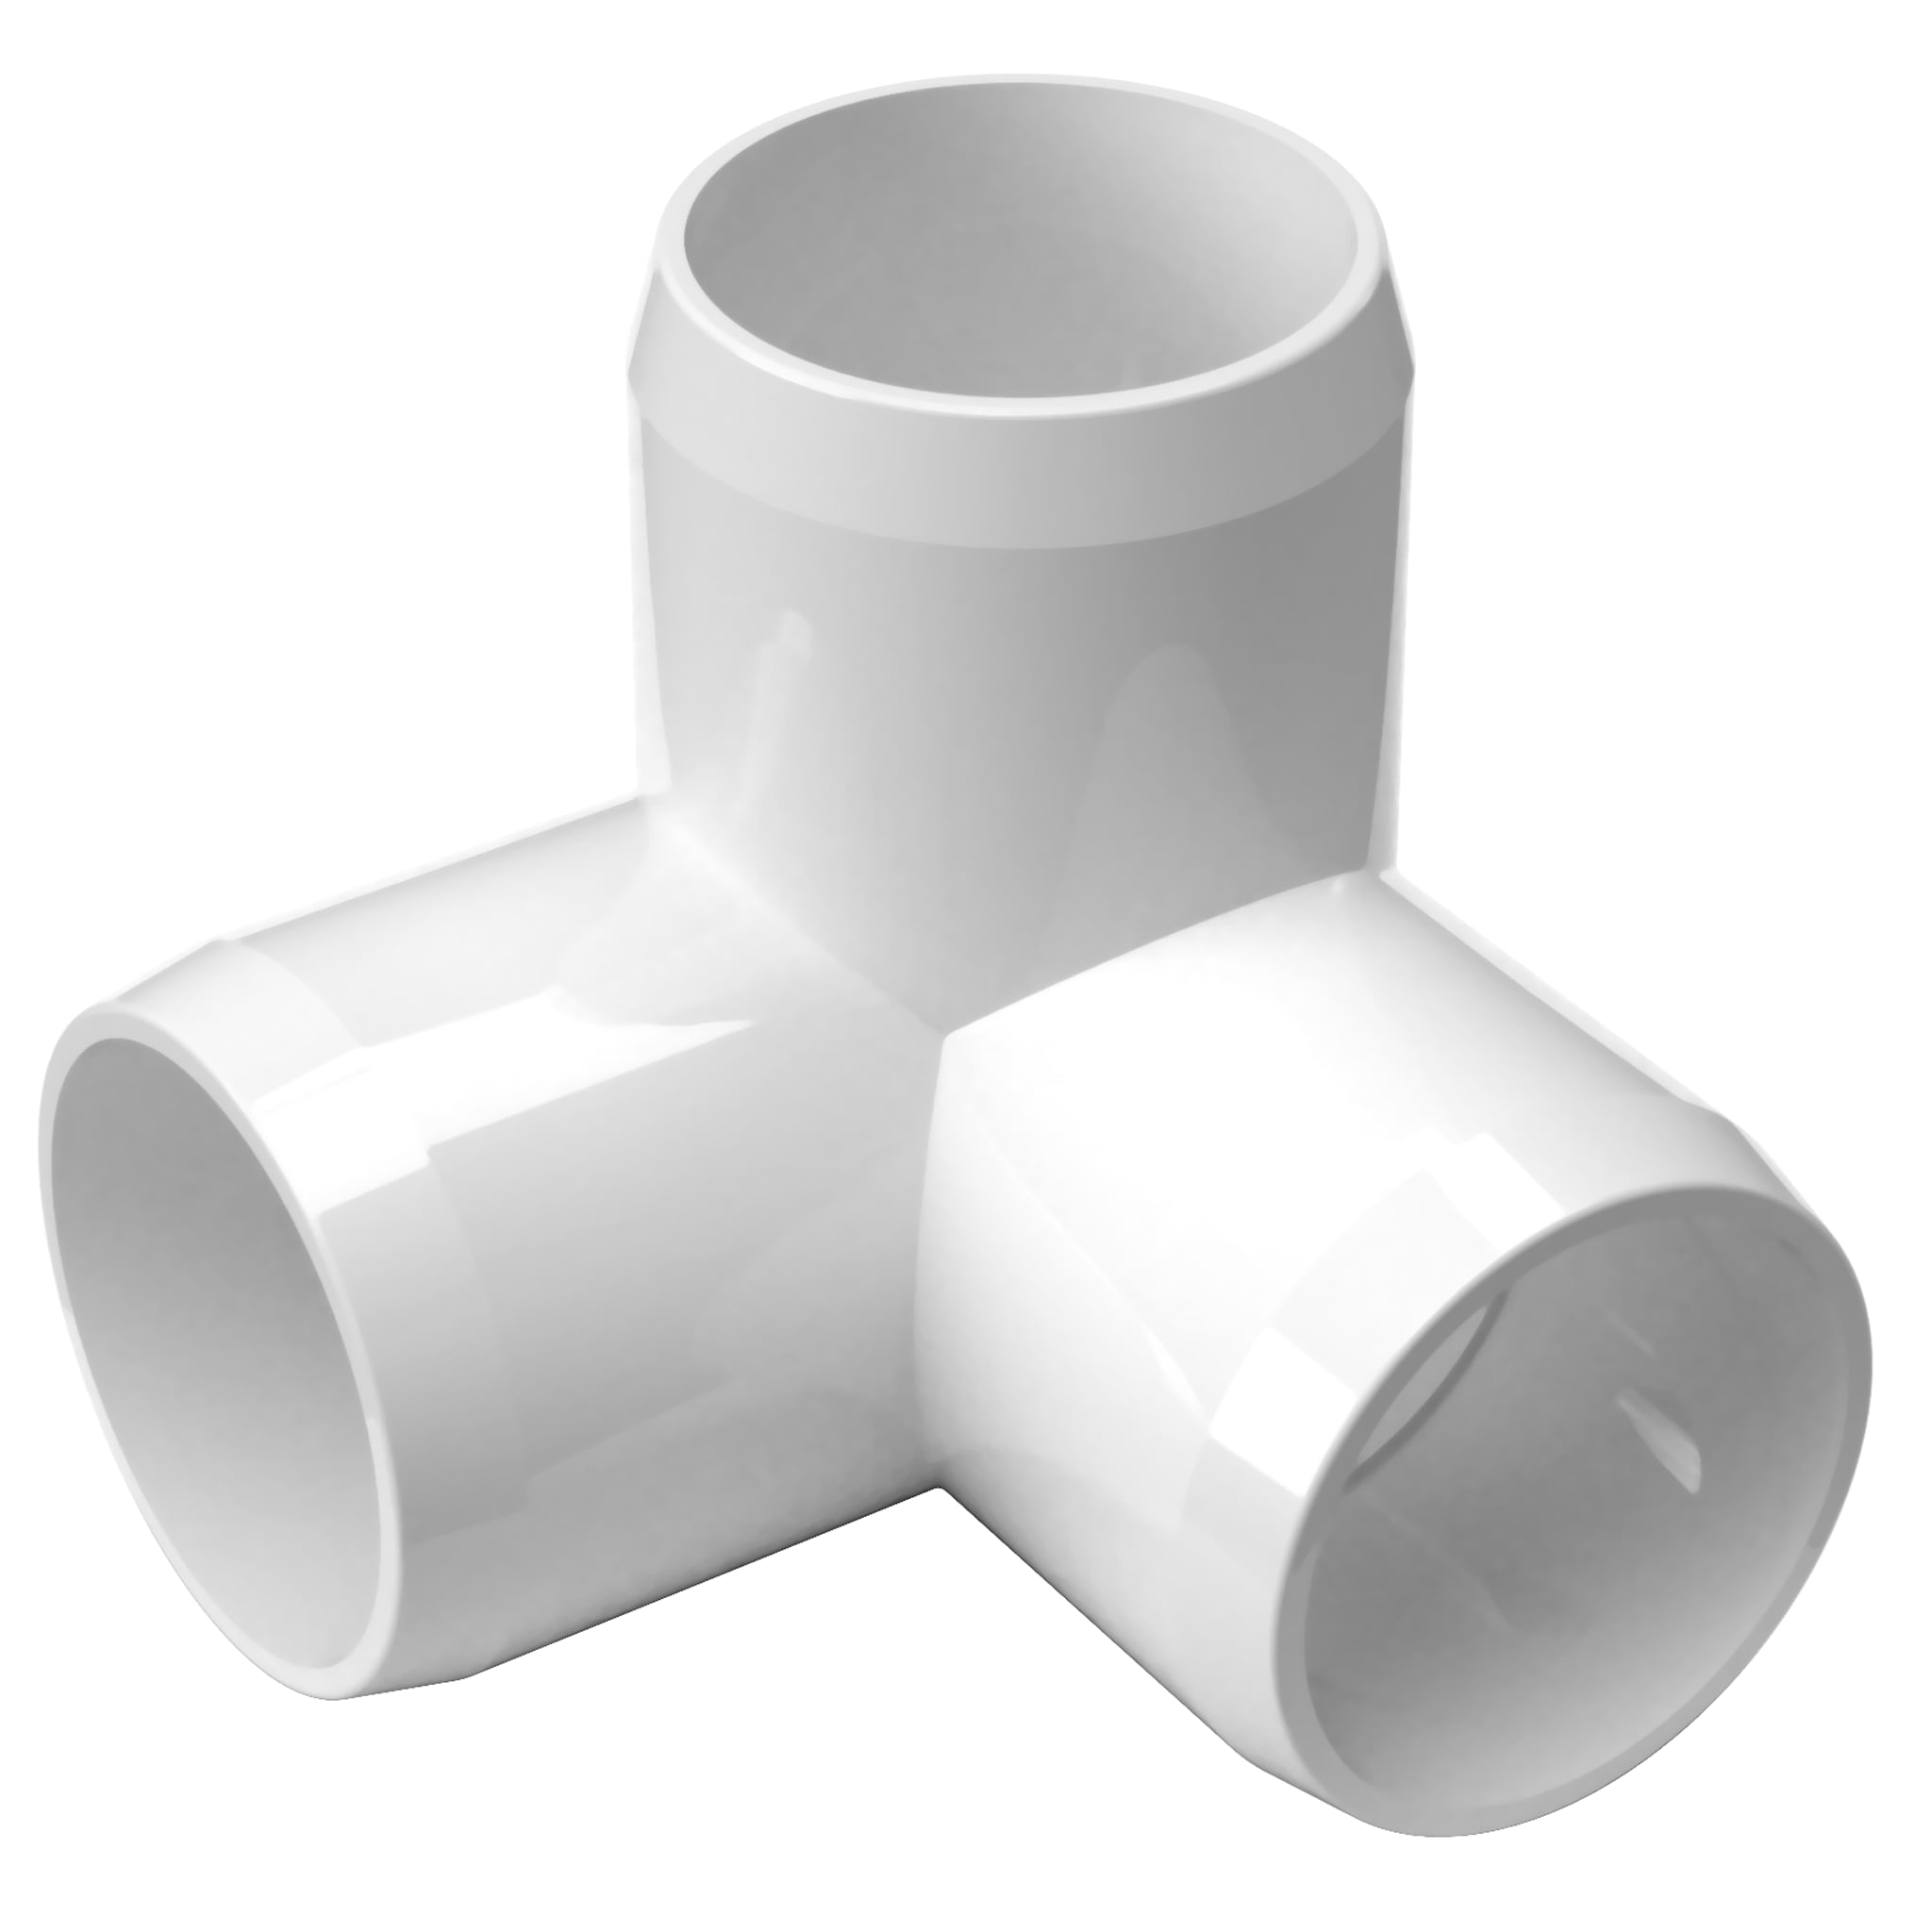 3-Way Elbow PVC Fitting, Furniture Grade, 1-1/4 size, White (Pack of 4), Size: 1-1/4 inch